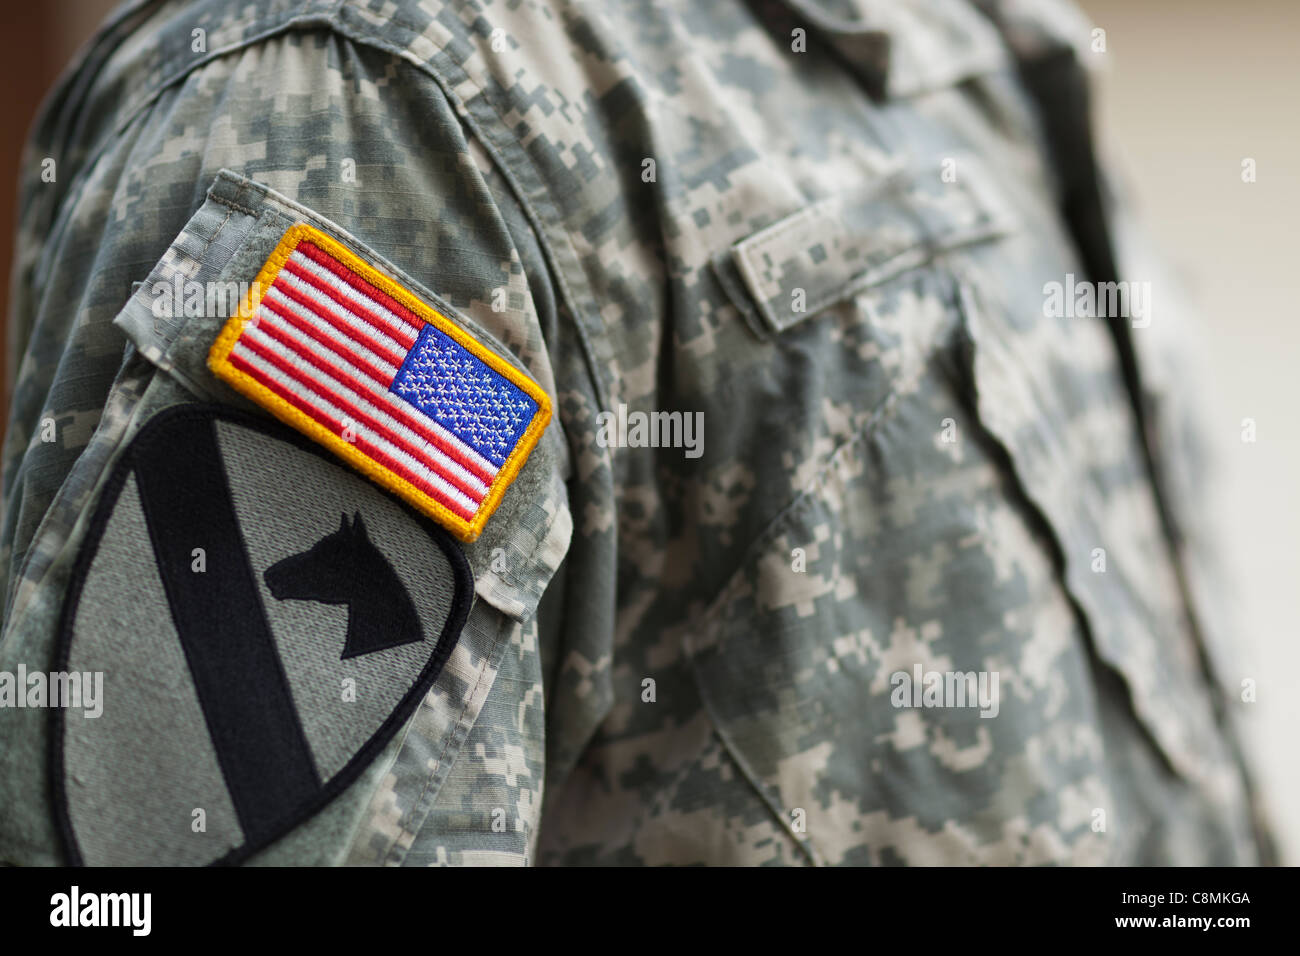 U.S. Flag Patch On Military Uniforms